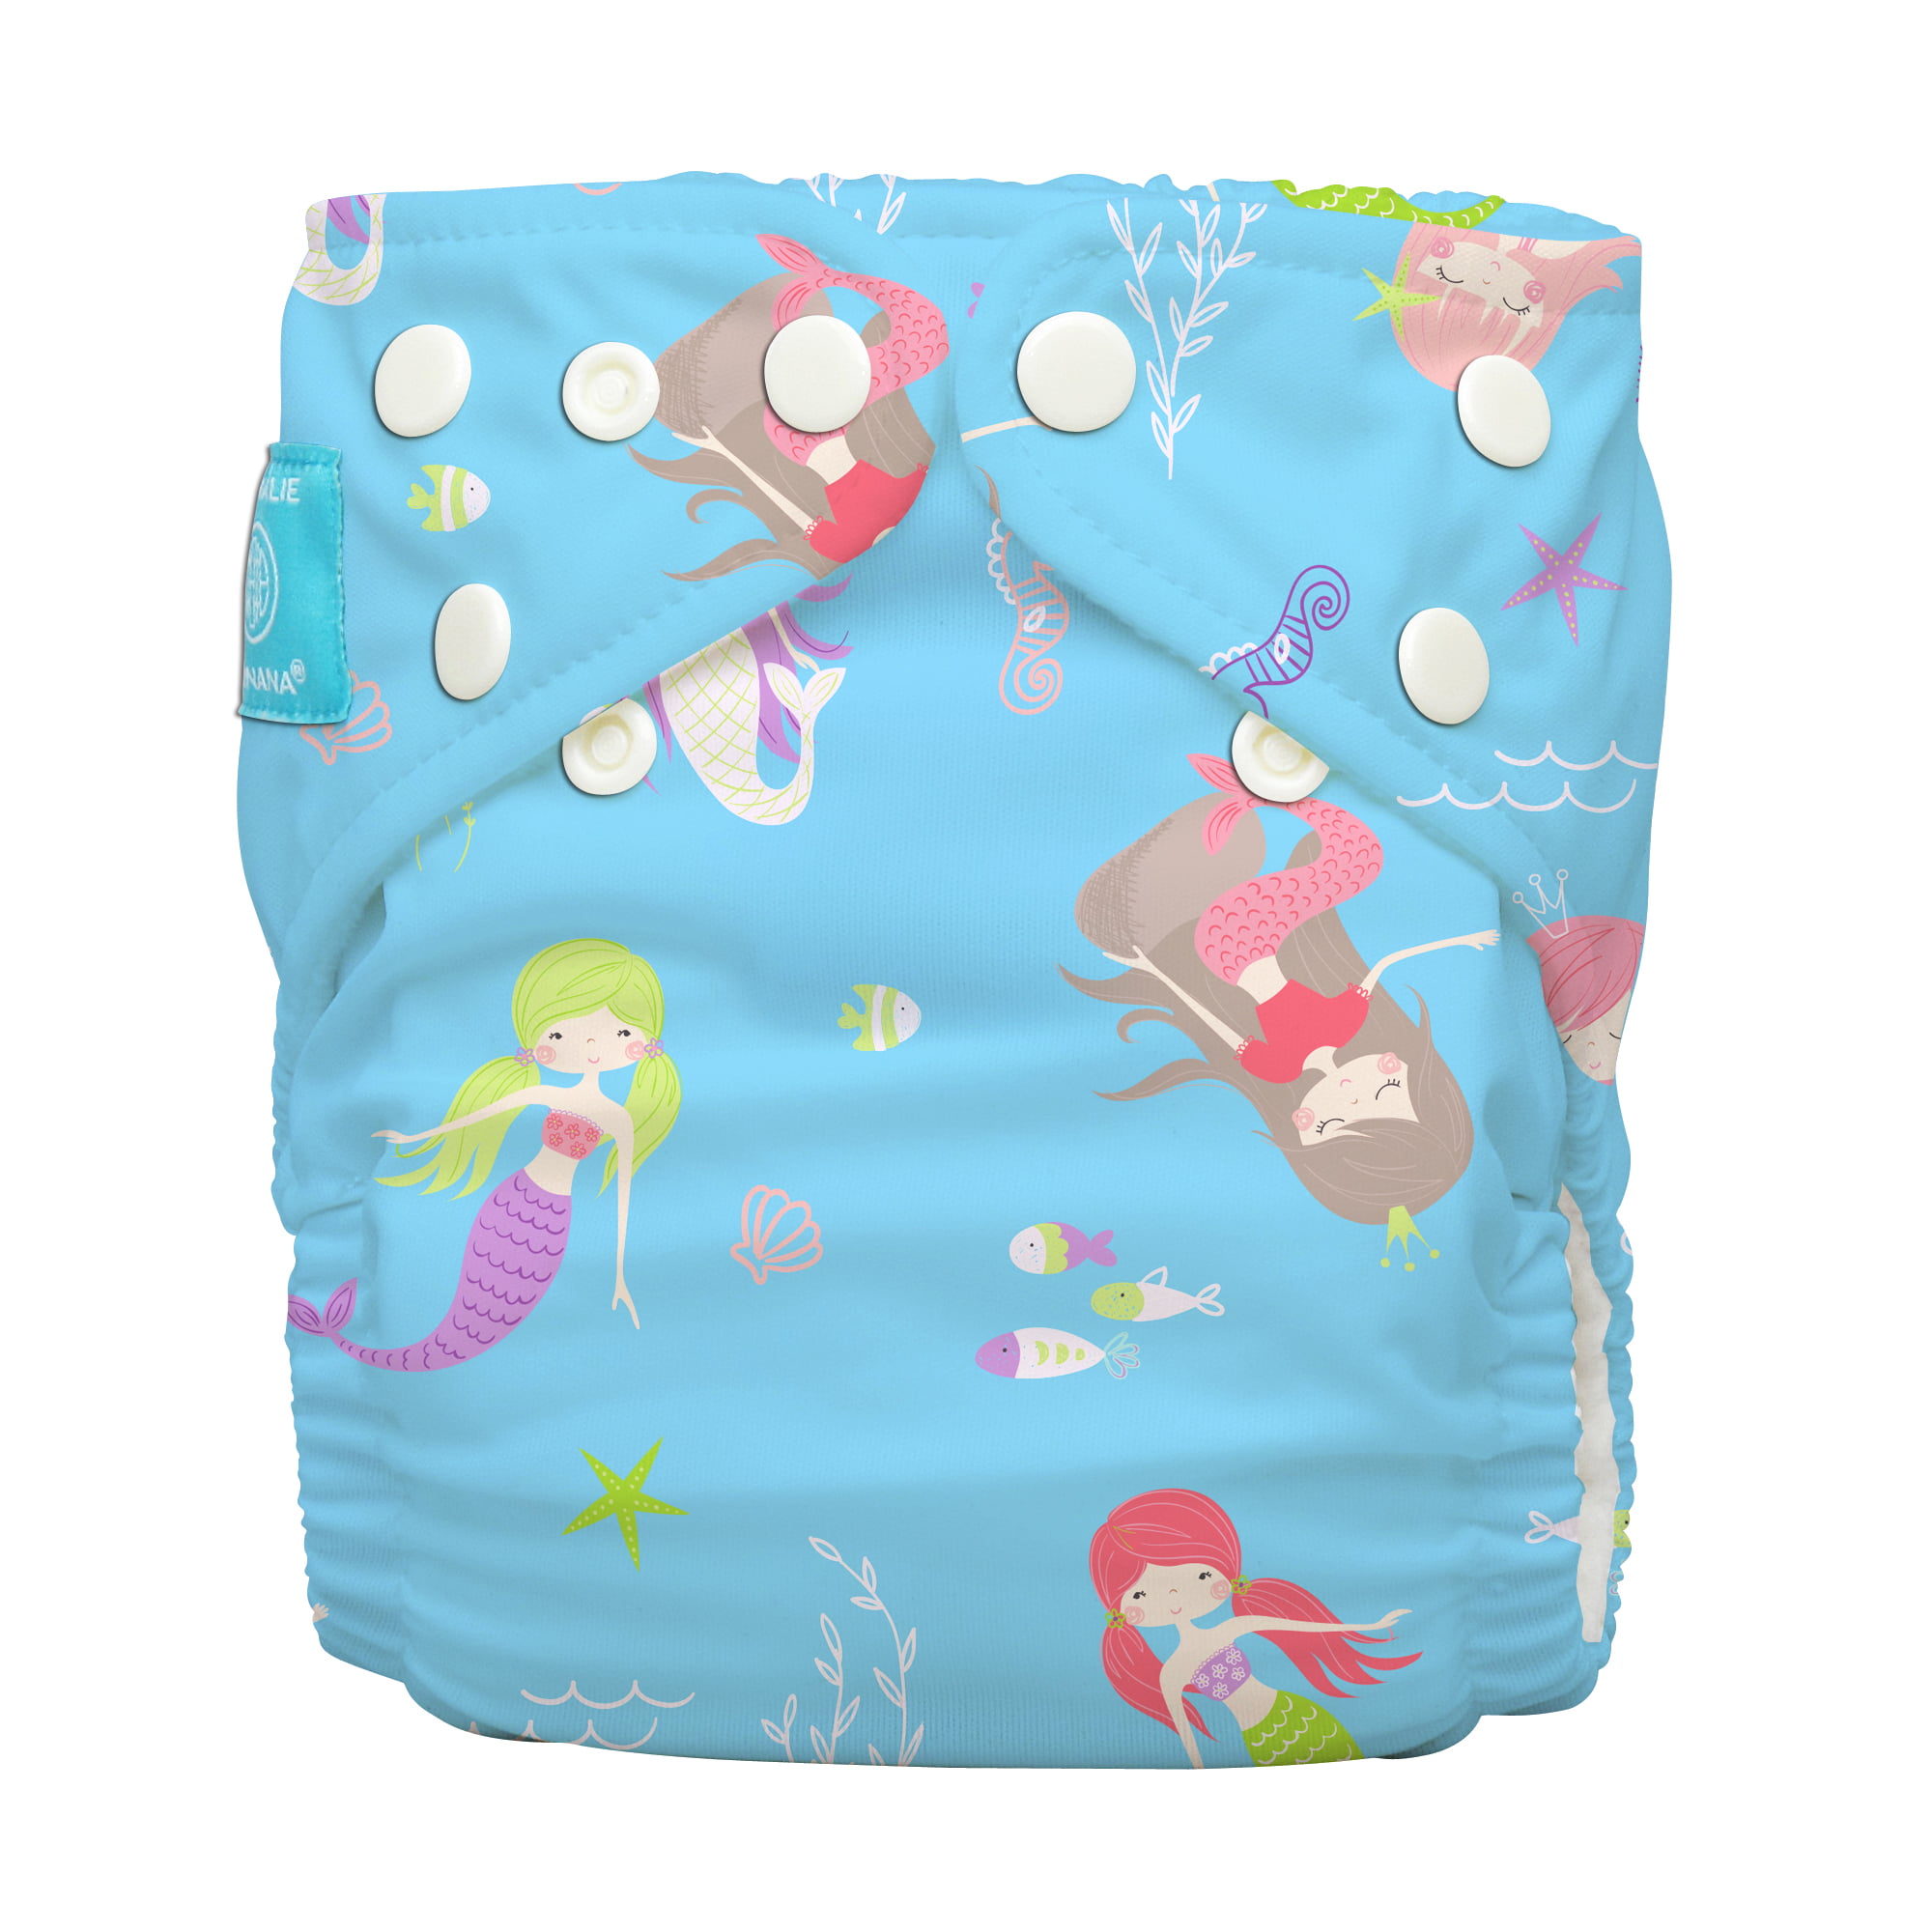 Modern Cloth Reusable Washable Baby Nappy Diaper & Insert Bumble Bee 